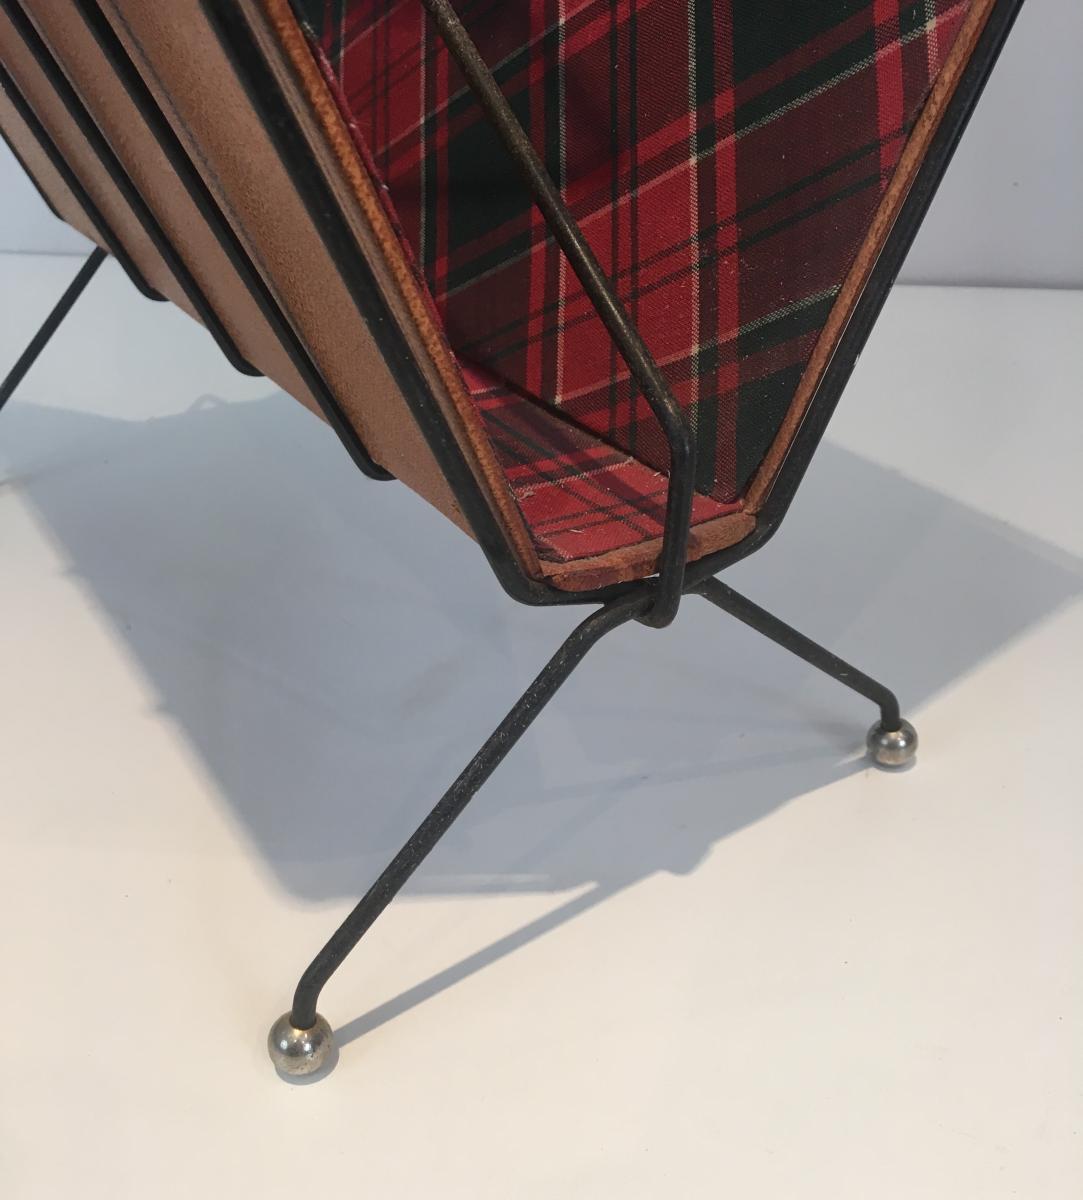 Rare Magazine Rack In Black Lacquered Metal, Leather And Fabric Burberry Way.-photo-4